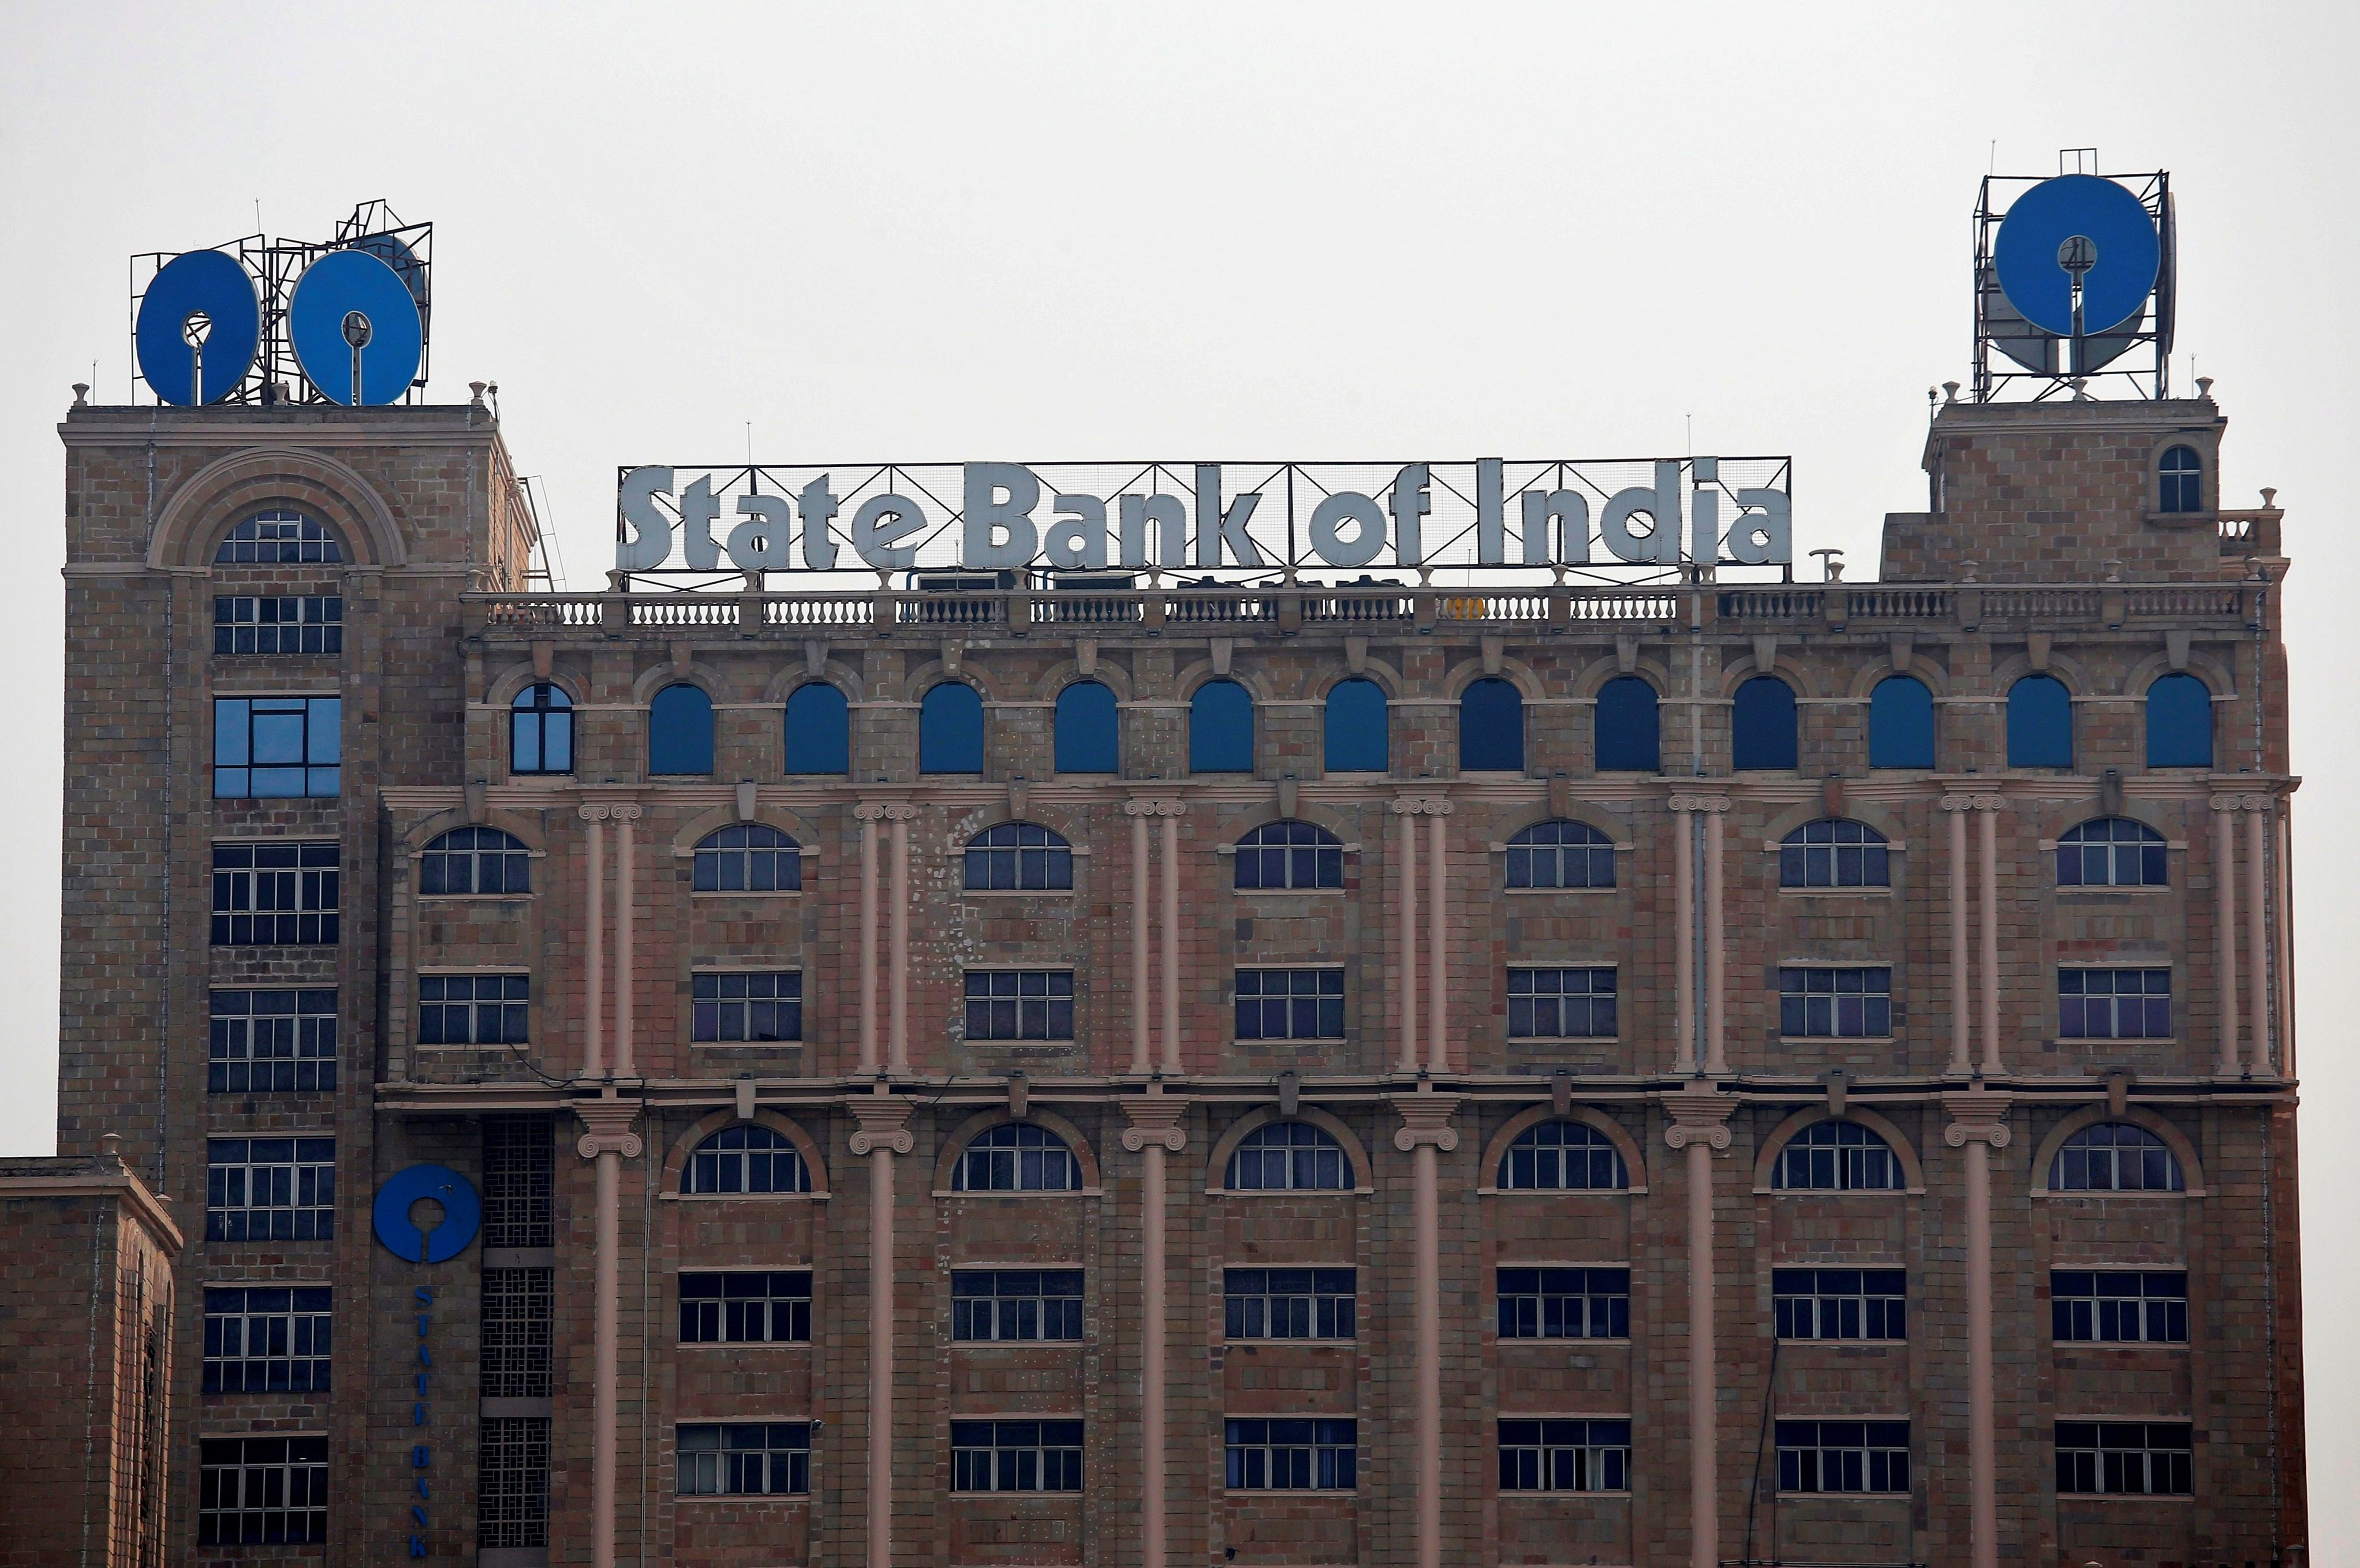 The State Bank of India (SBI) office building in Kolkata. (Credit: Reuters)